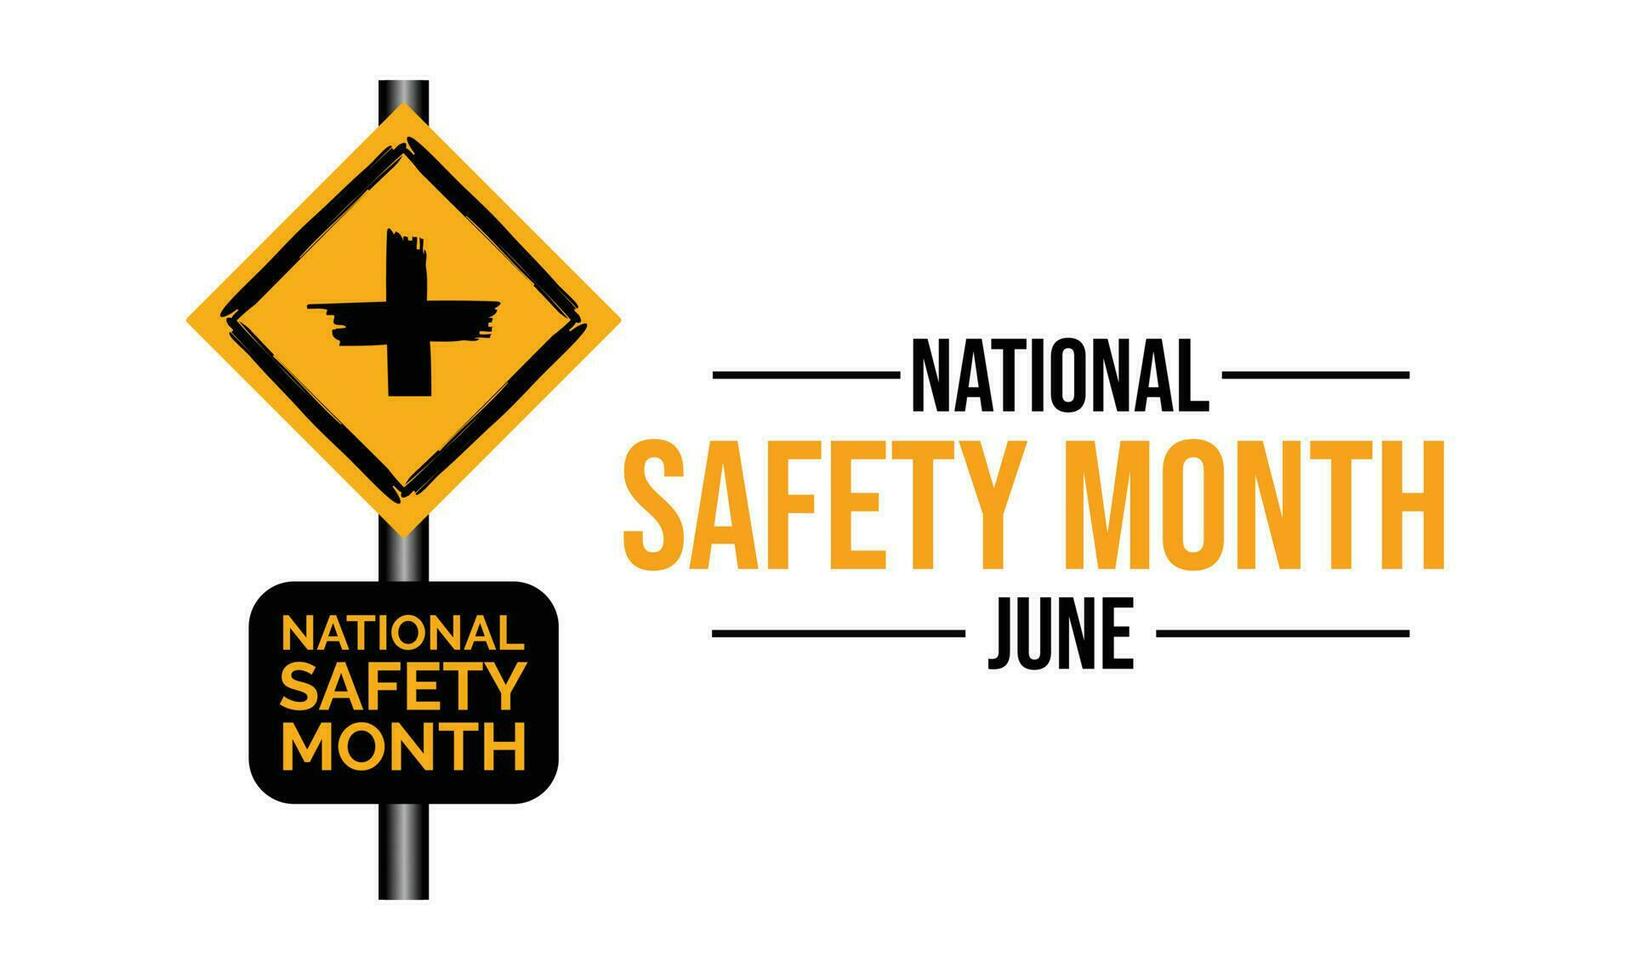 June is Internet Safety Month. Download & Share FREE Safety